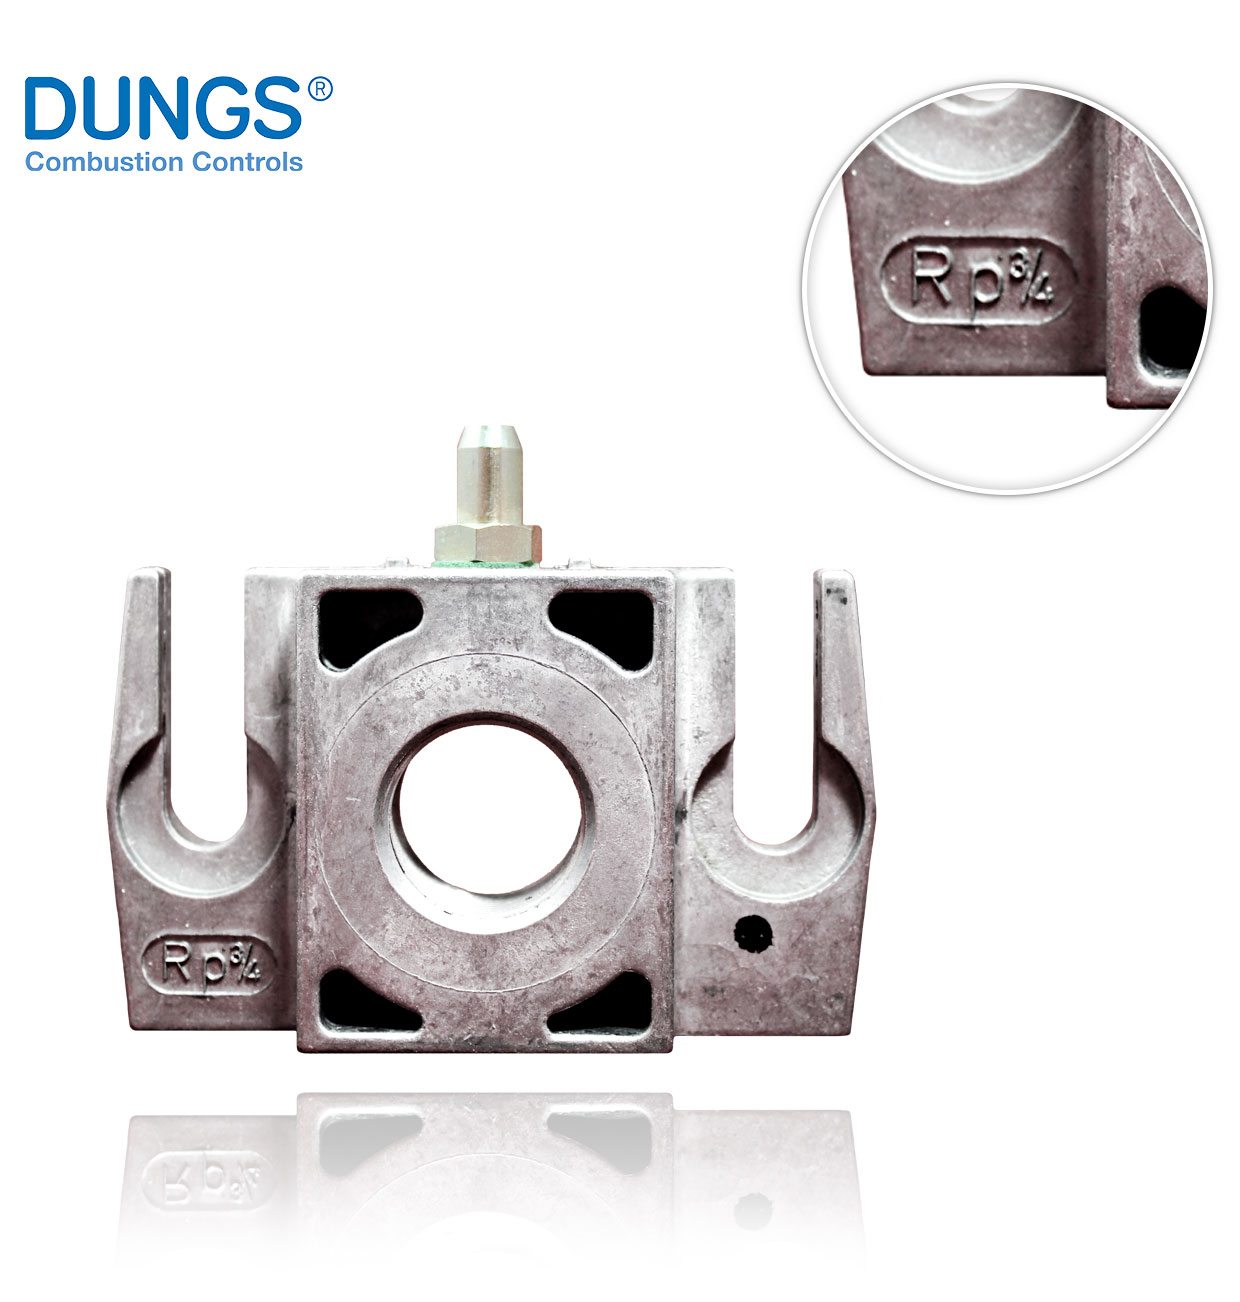 R3/4" DUNGS FLANGE WITH NOZZLES FOR MB410/412